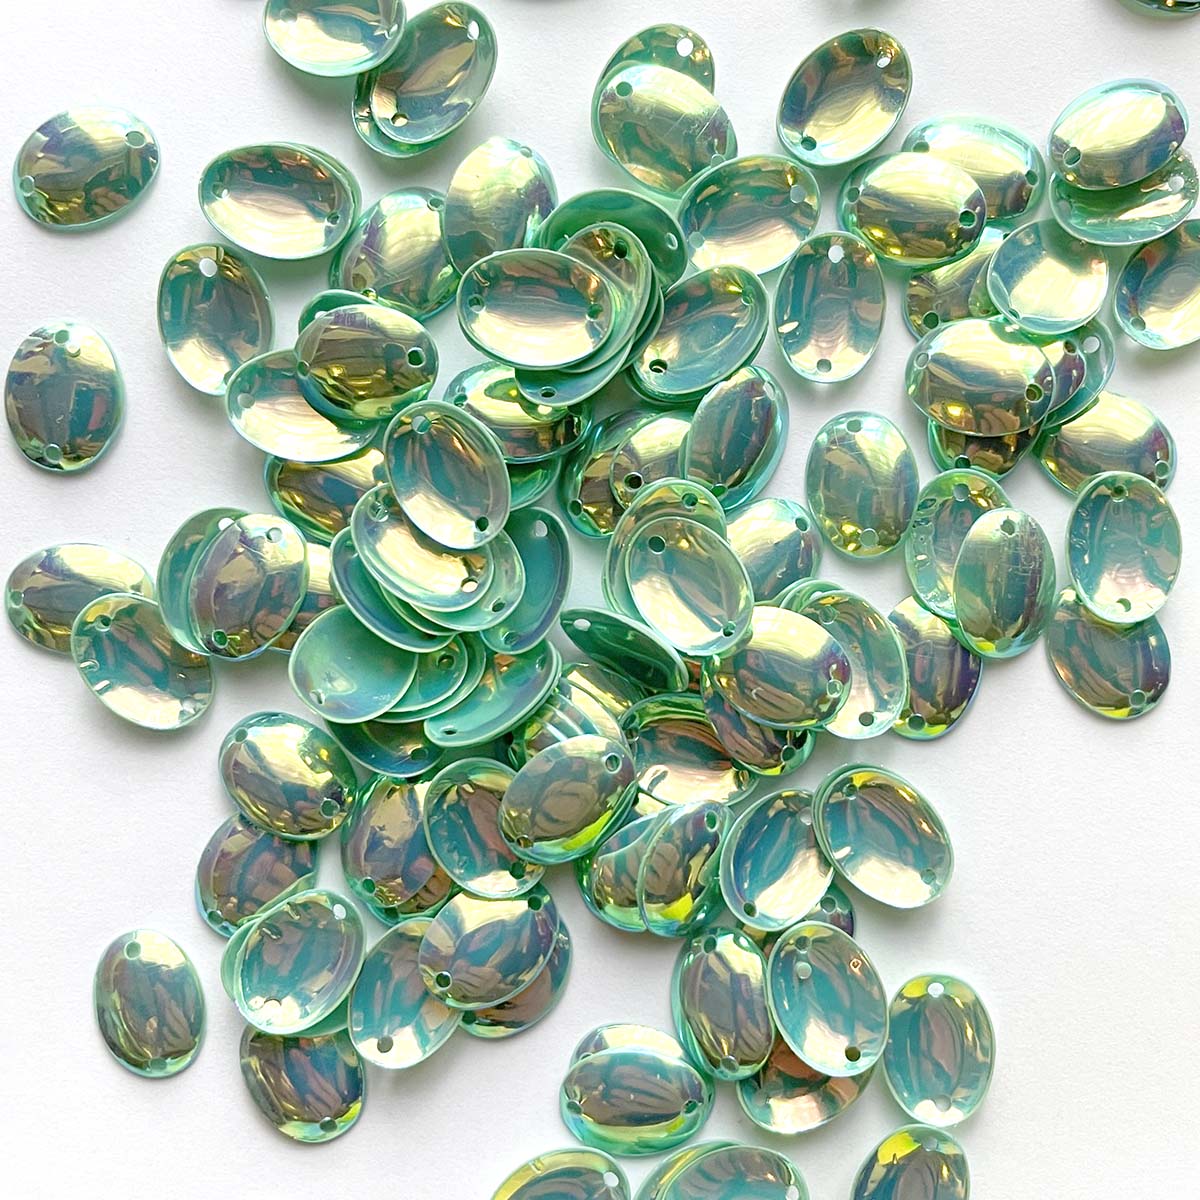 www.colourstreams.com.au Colour Streams Sequins Embellishing Costuming Jewellry Embroidery Stitching Mardi Gras Dancing Ballet Theatre Shows Drag Queen Bling Cup Circle Shape Reflective Iridescent Shiny Australia NZ Canada Aqua Green with Gold and Copper Lights 11mm x 8mm mm S296